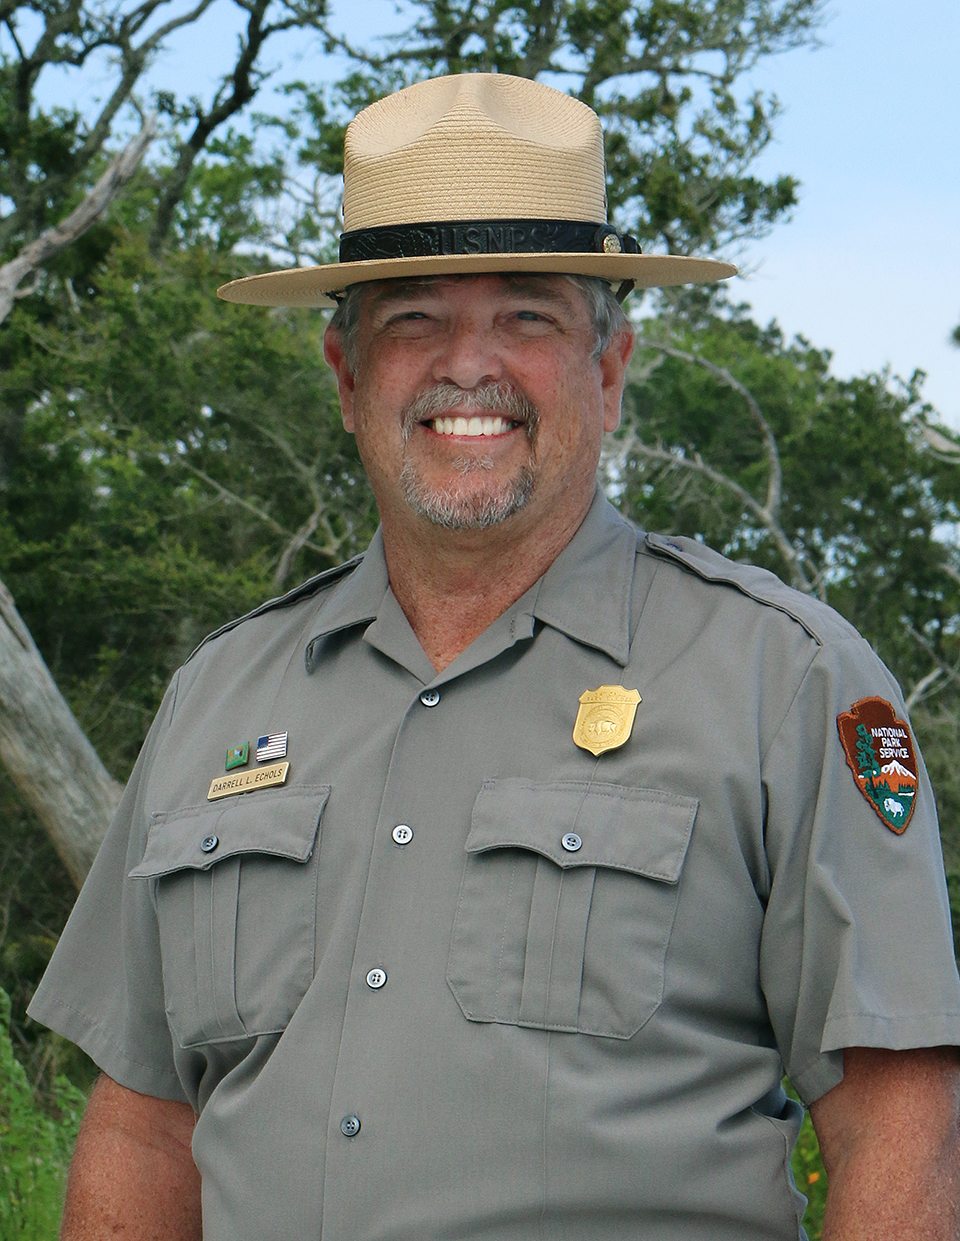 Darrell Echols will represent the Gulf Islands National Seashore as the new superintendent beginning July 18, 2021. He has worked for the National Park Service for more than 30 years.